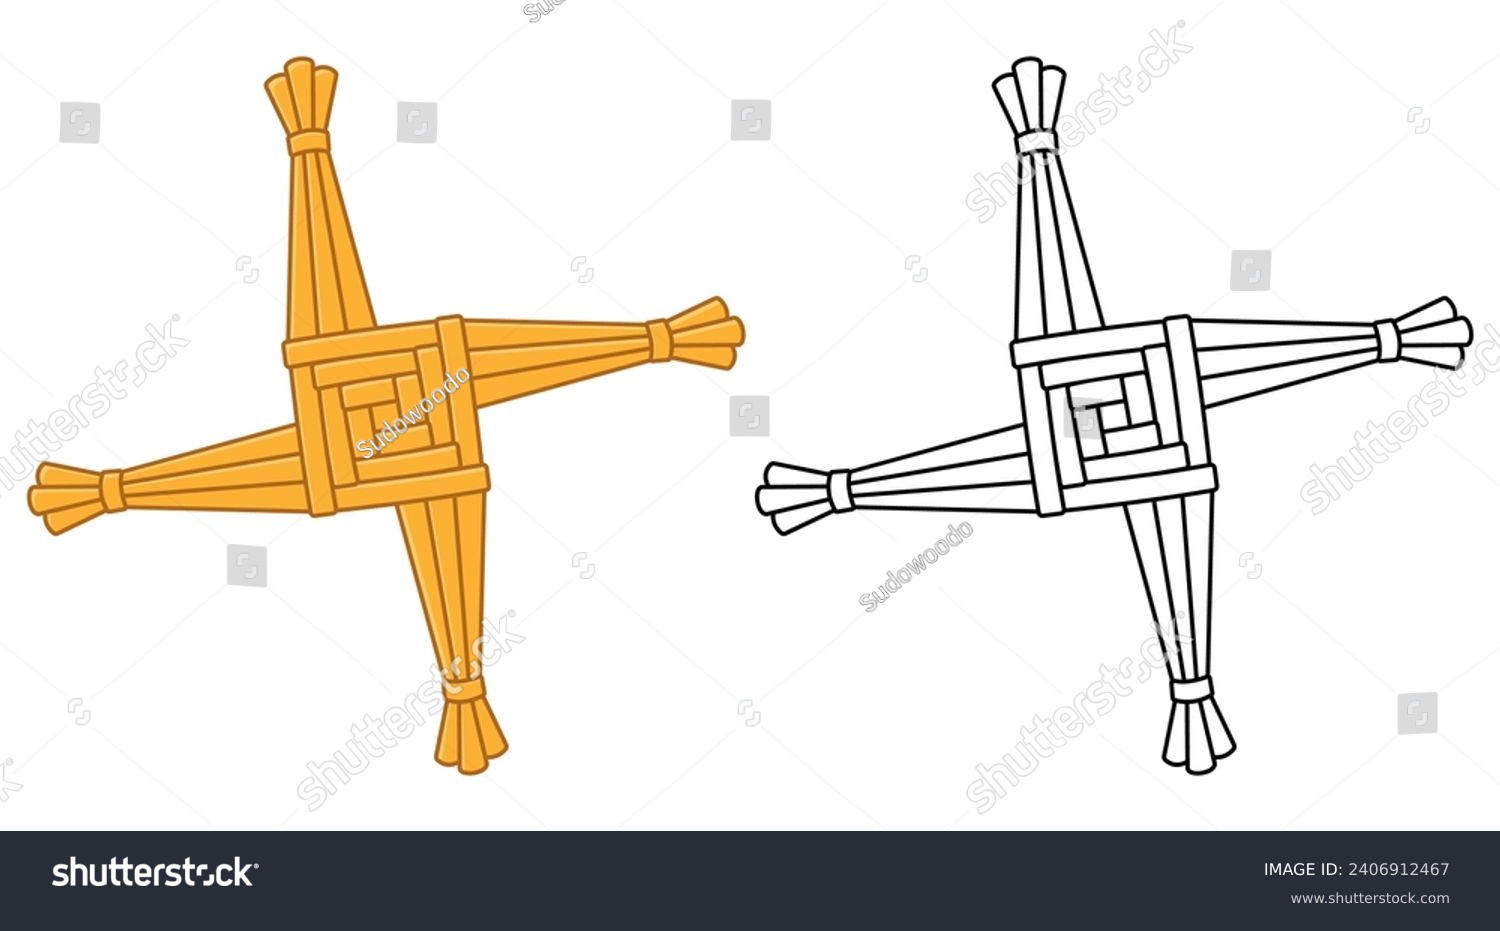 SVG of Saint Brigid's cross, Imbolc celebration tradition in Ireland. Handmade straw knot decoration. Vector illustration. Color and black and white outline drawing. svg